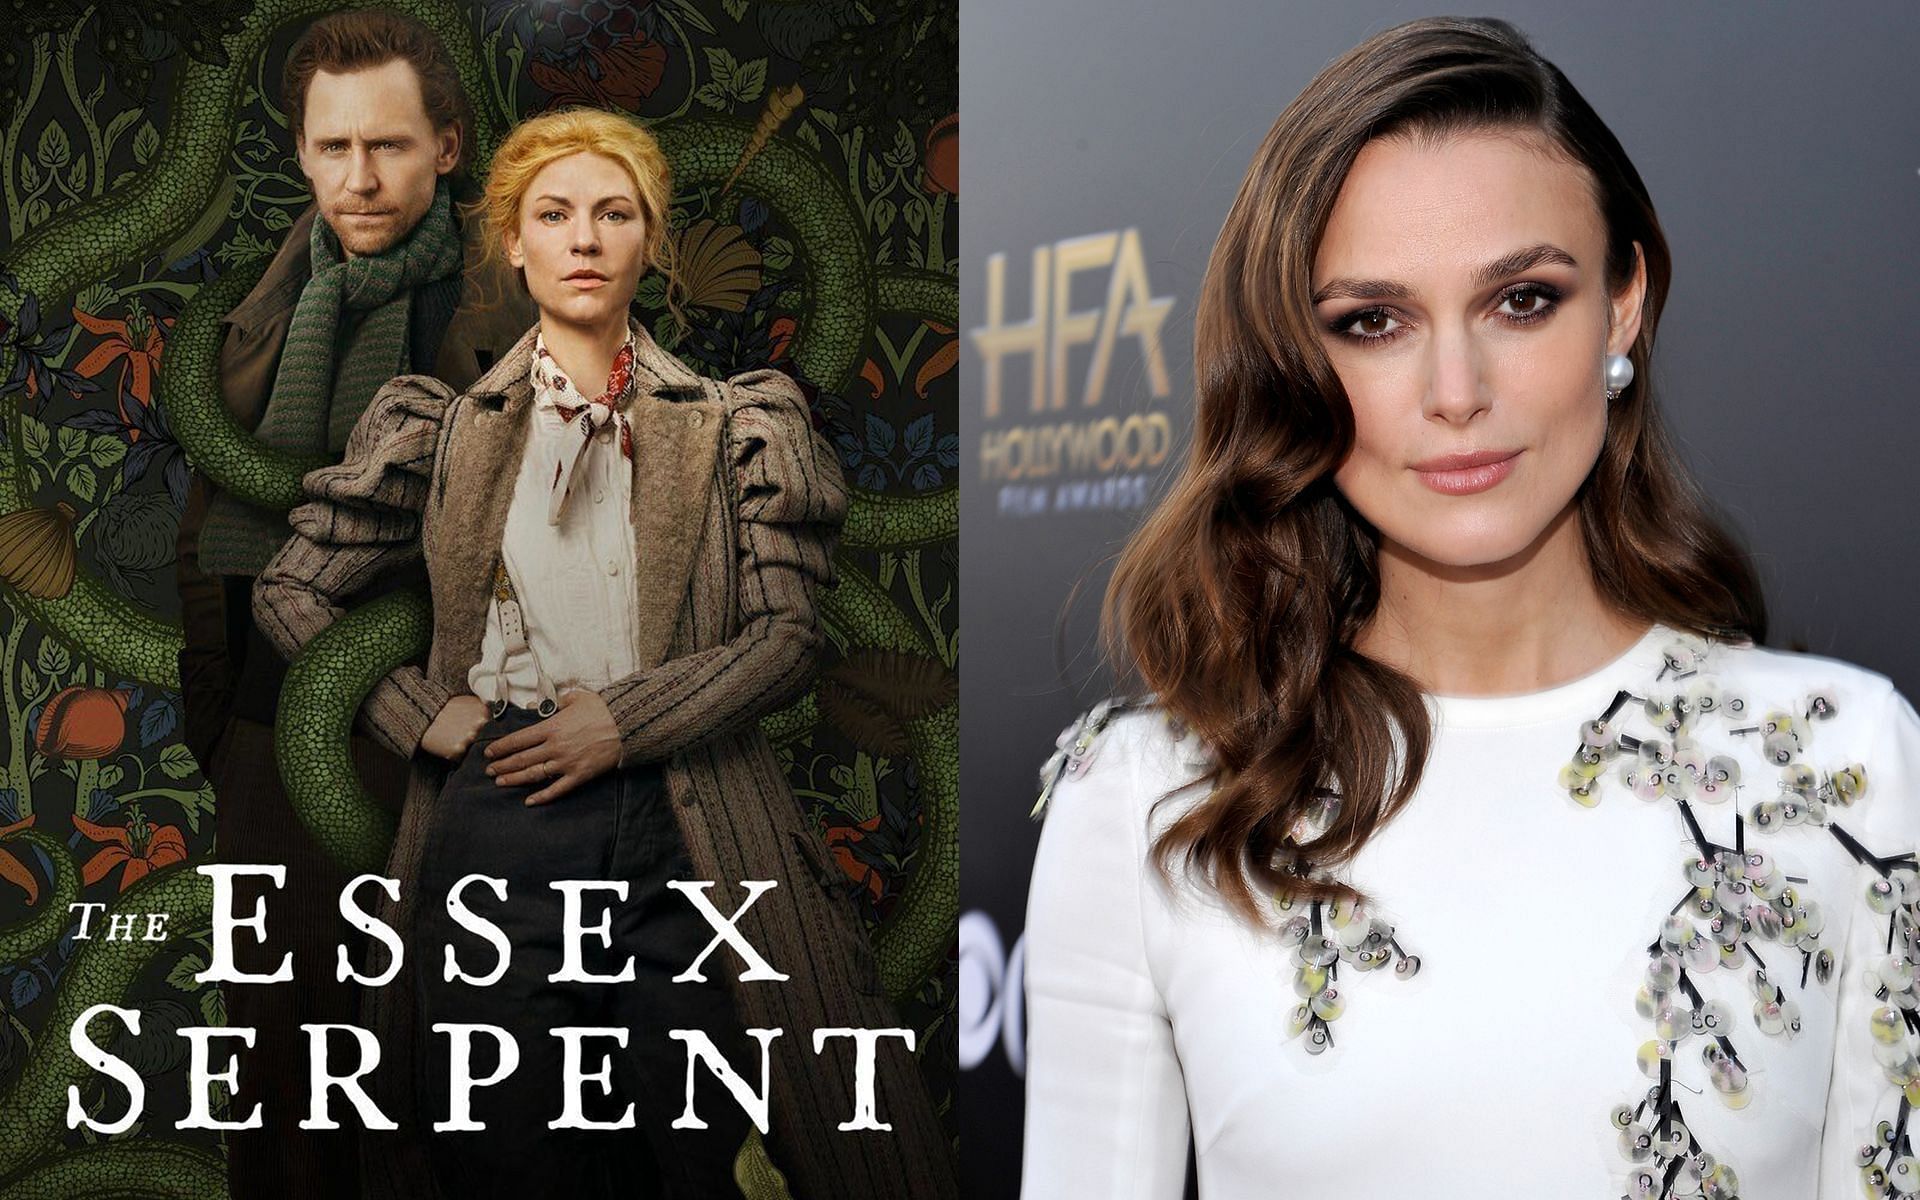 The Essex Serpent will premiere on Apple TV+ this Friday, May 13, 2022 (Image via IMDb)